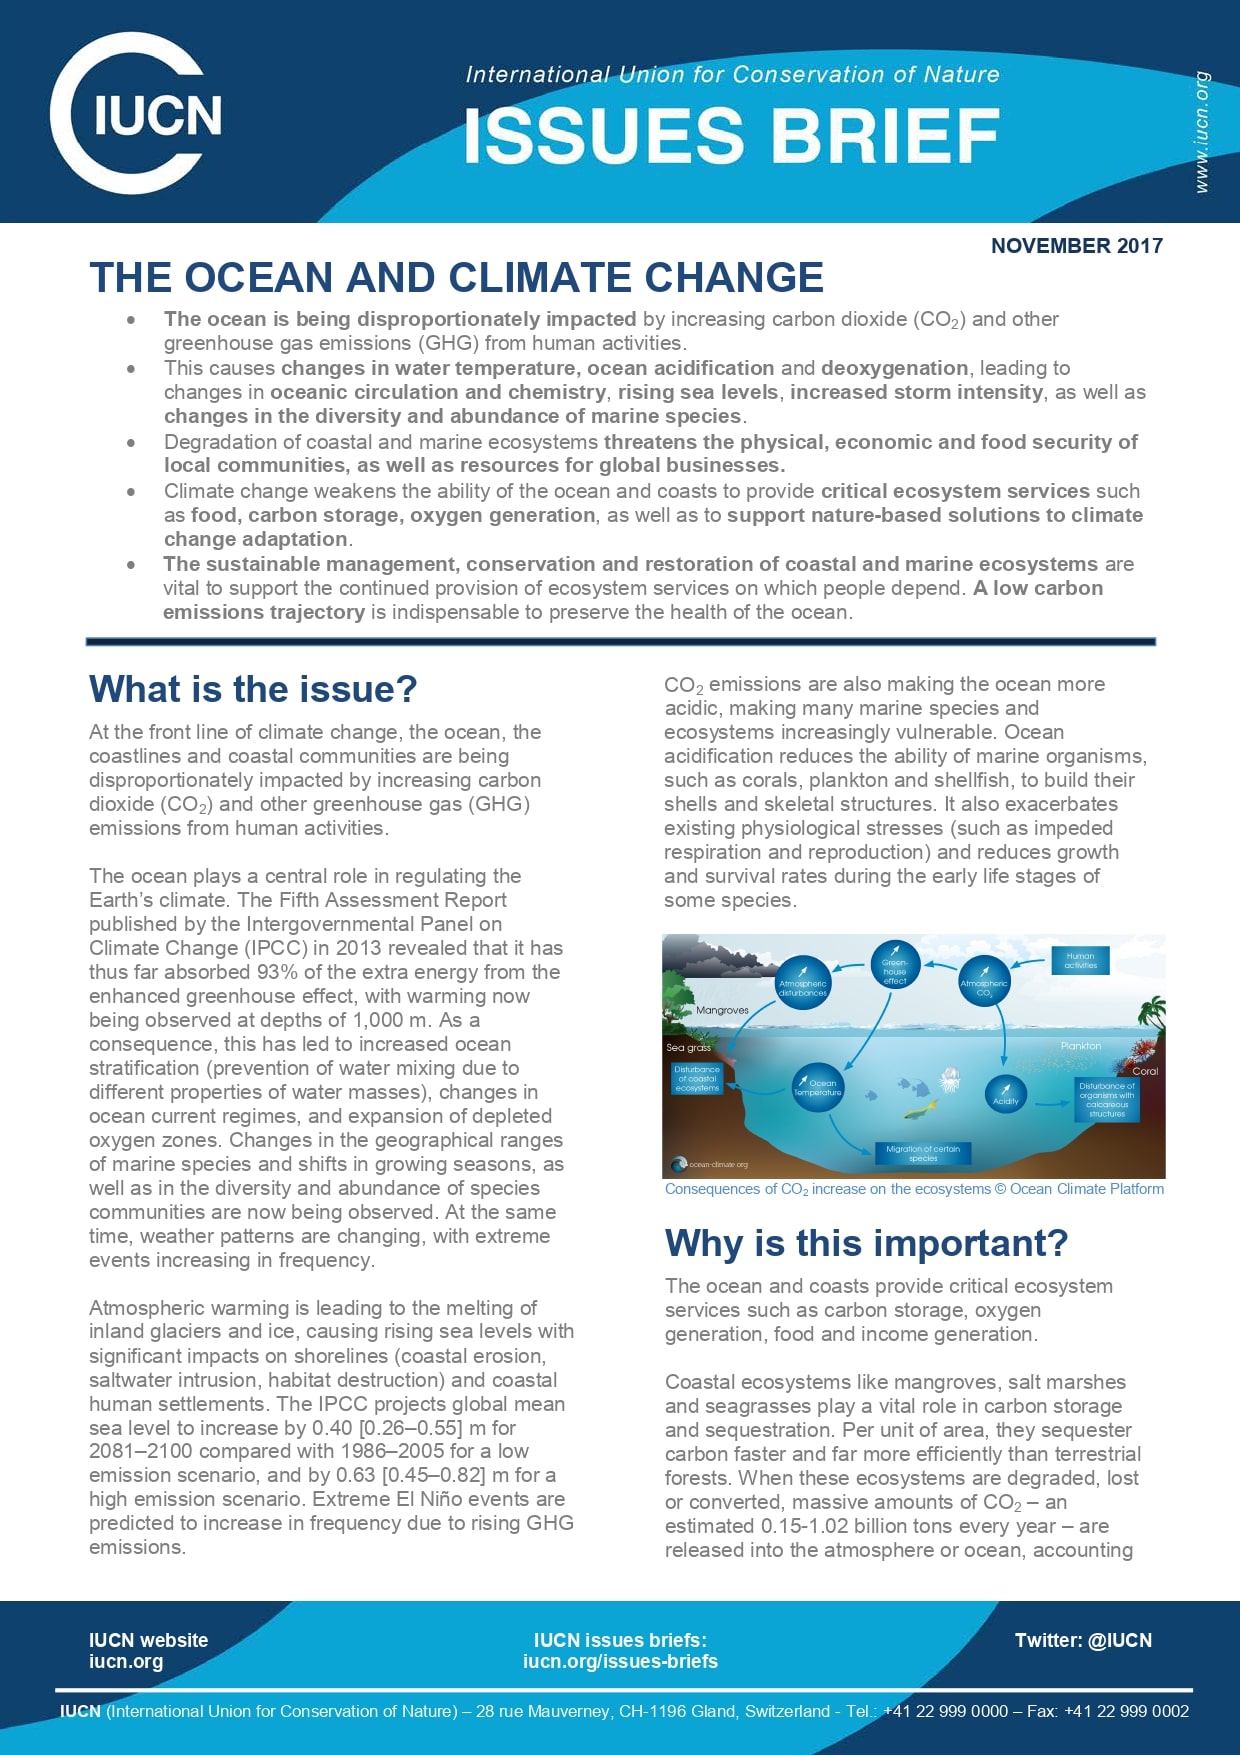 The ocean and climate change